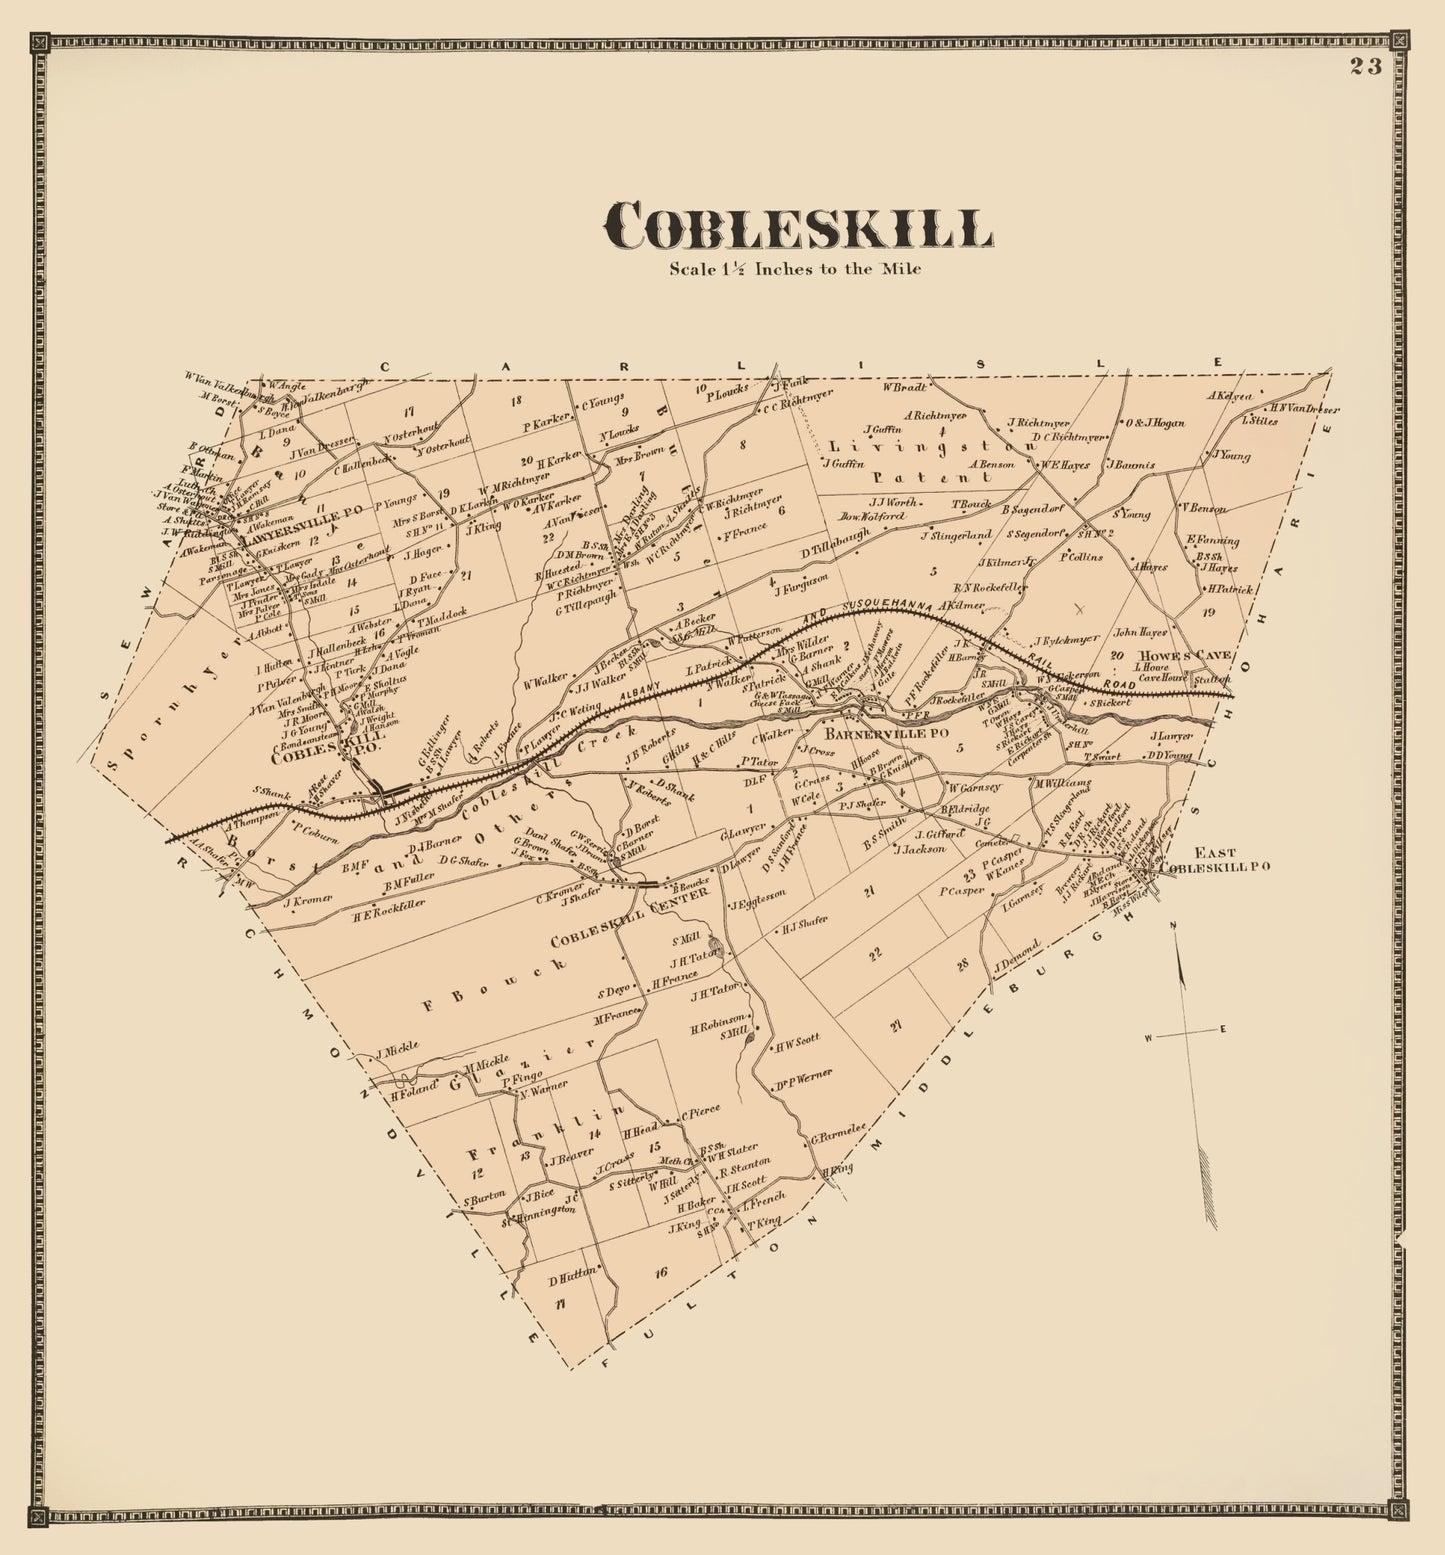 Historic City Map - Cobleskill New York - Beers 1866 - 23 x 24.75 - Vintage Wall Art